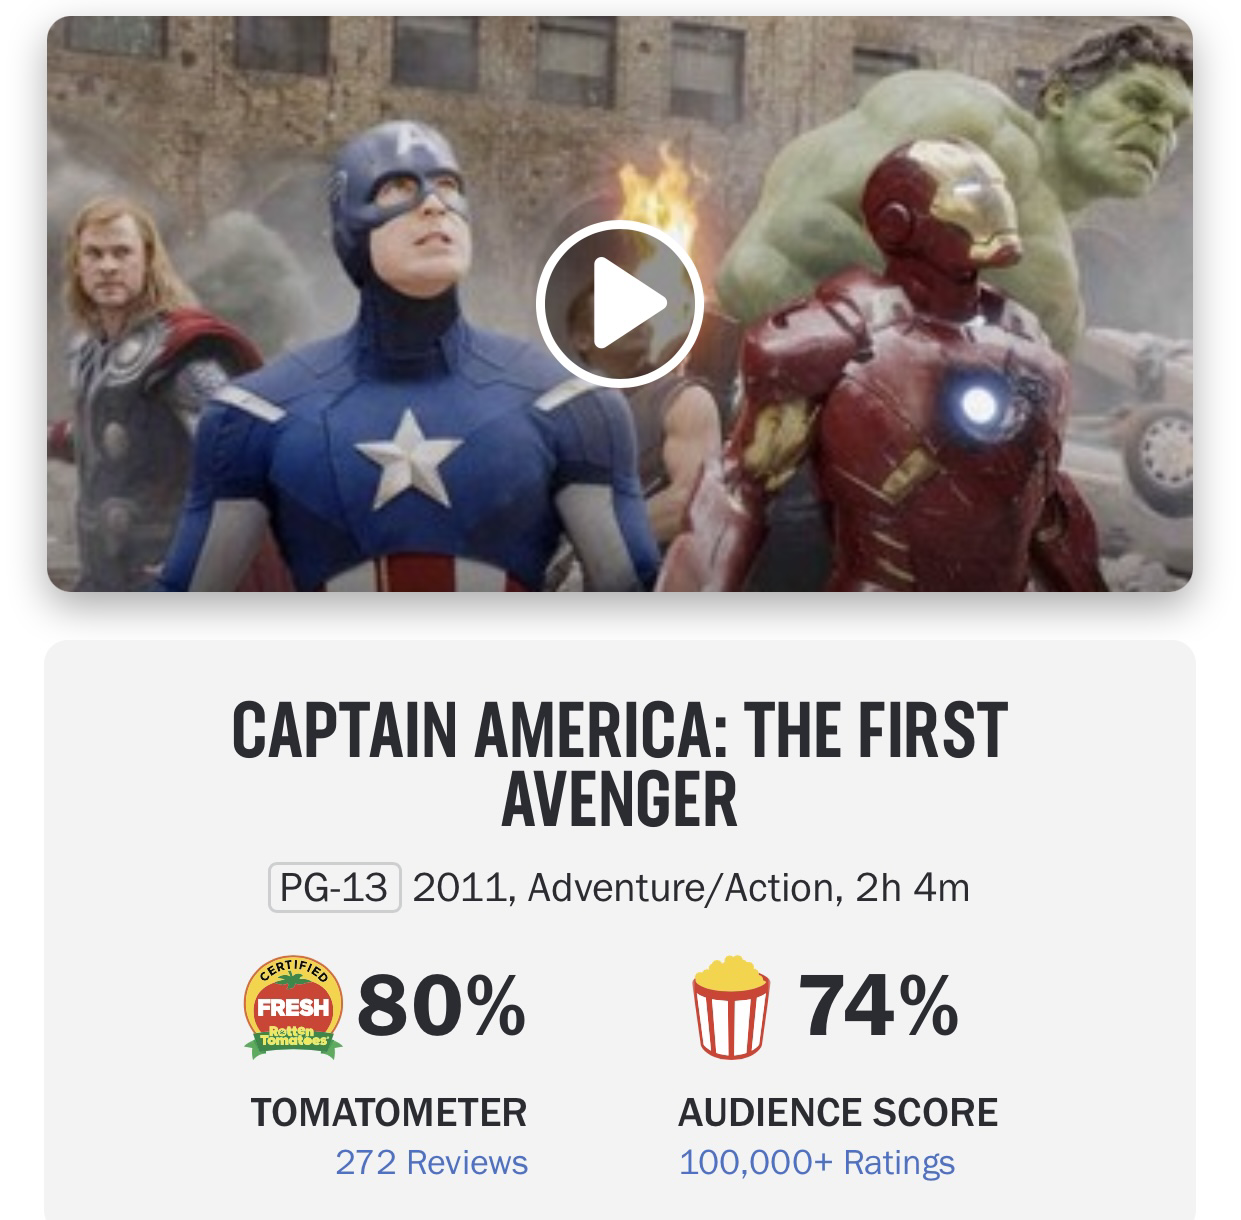 Rotten Tomatoes Blames Captain Marvel Review Controversy on a Glitch